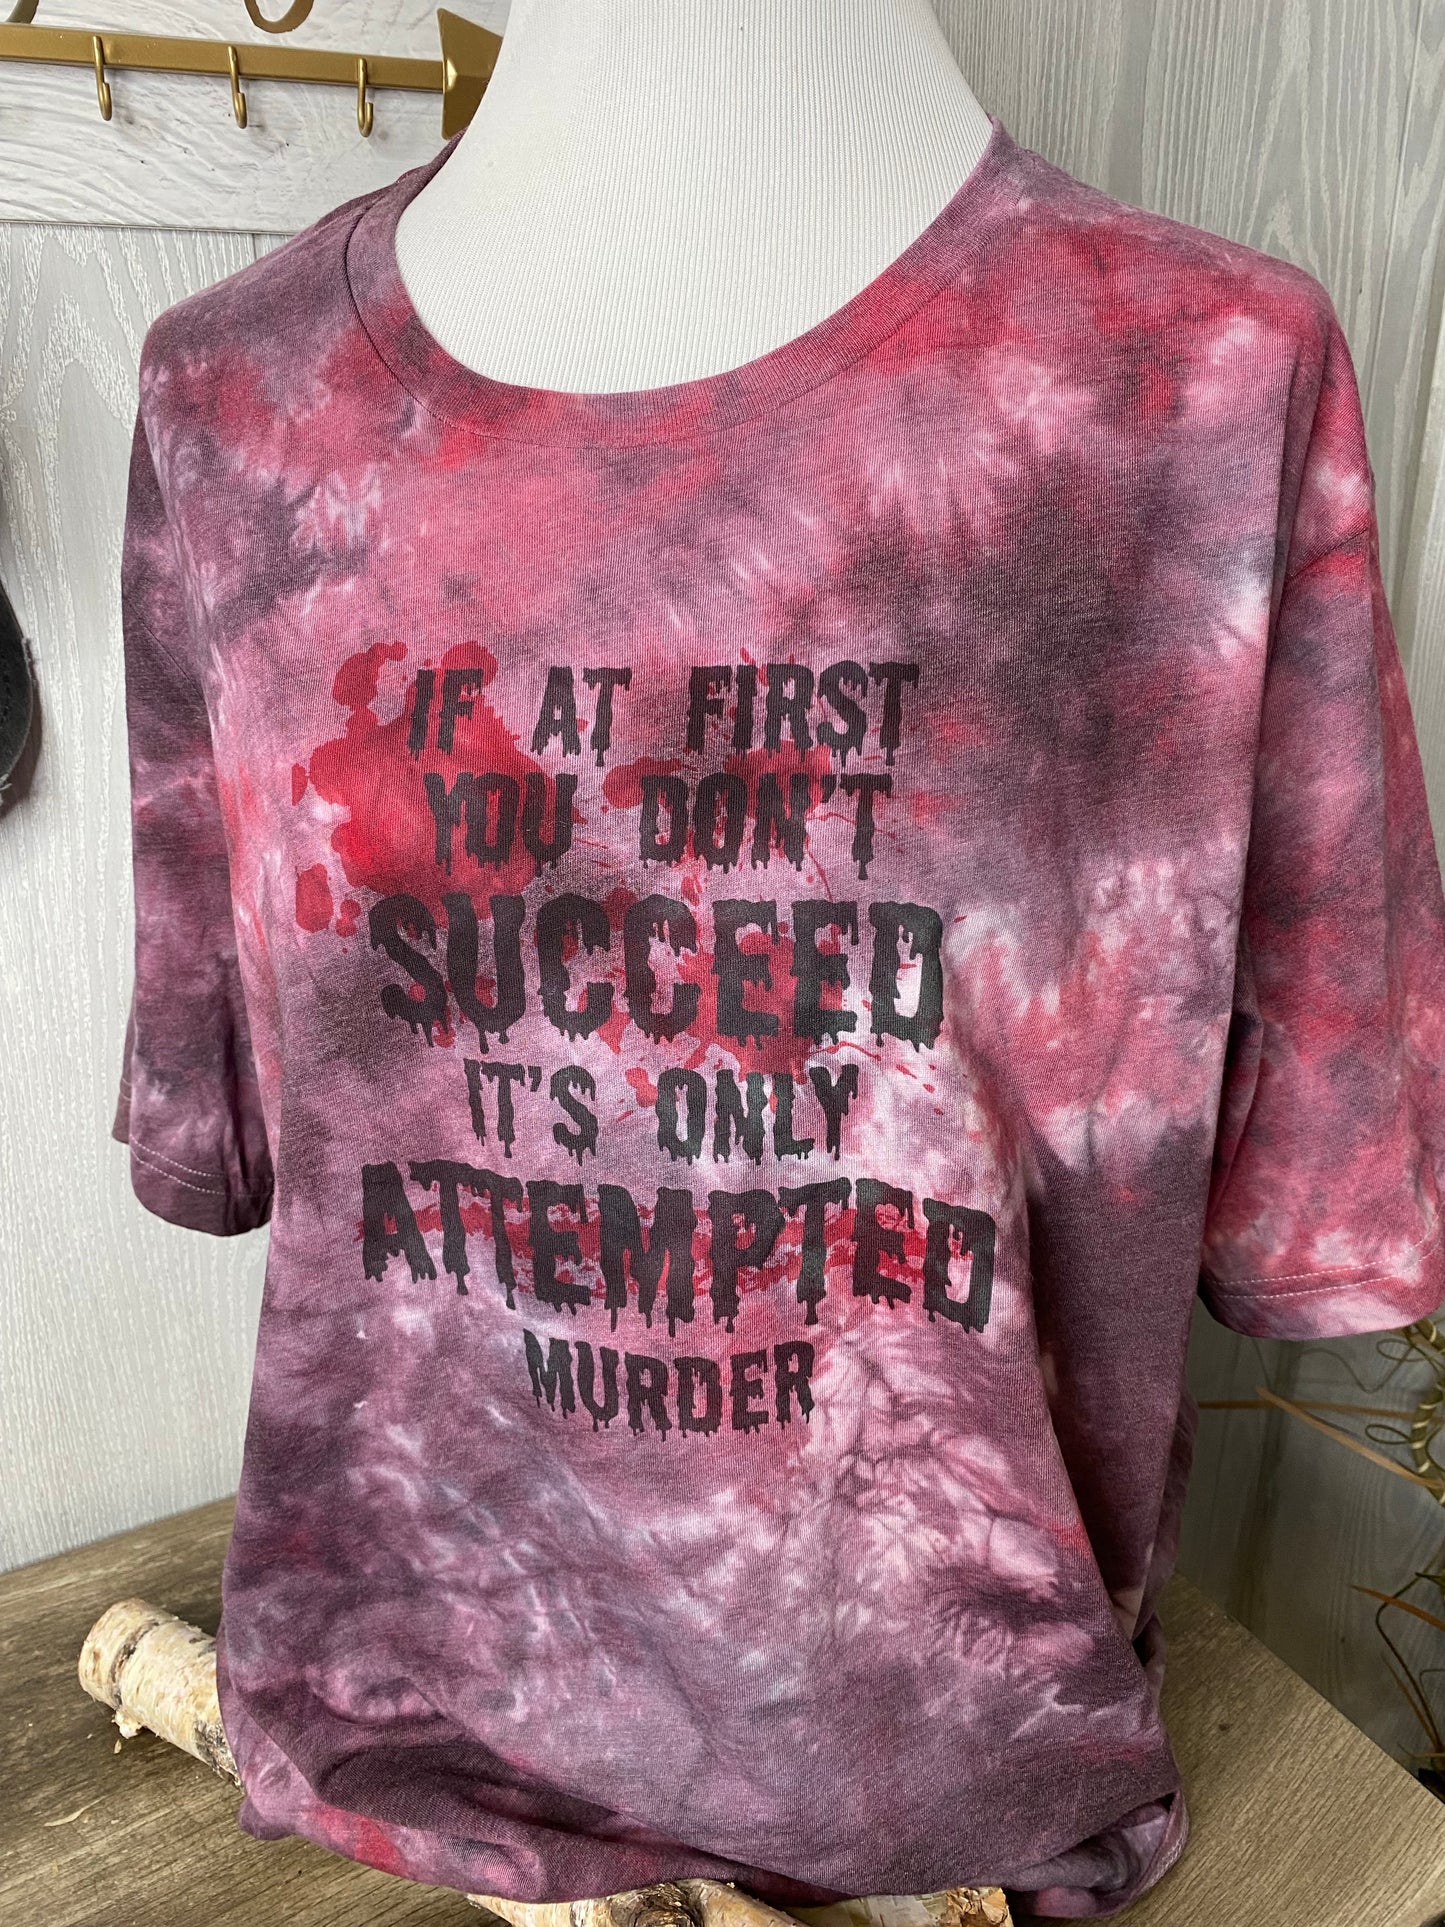 Attempted Murder Graphic Tee